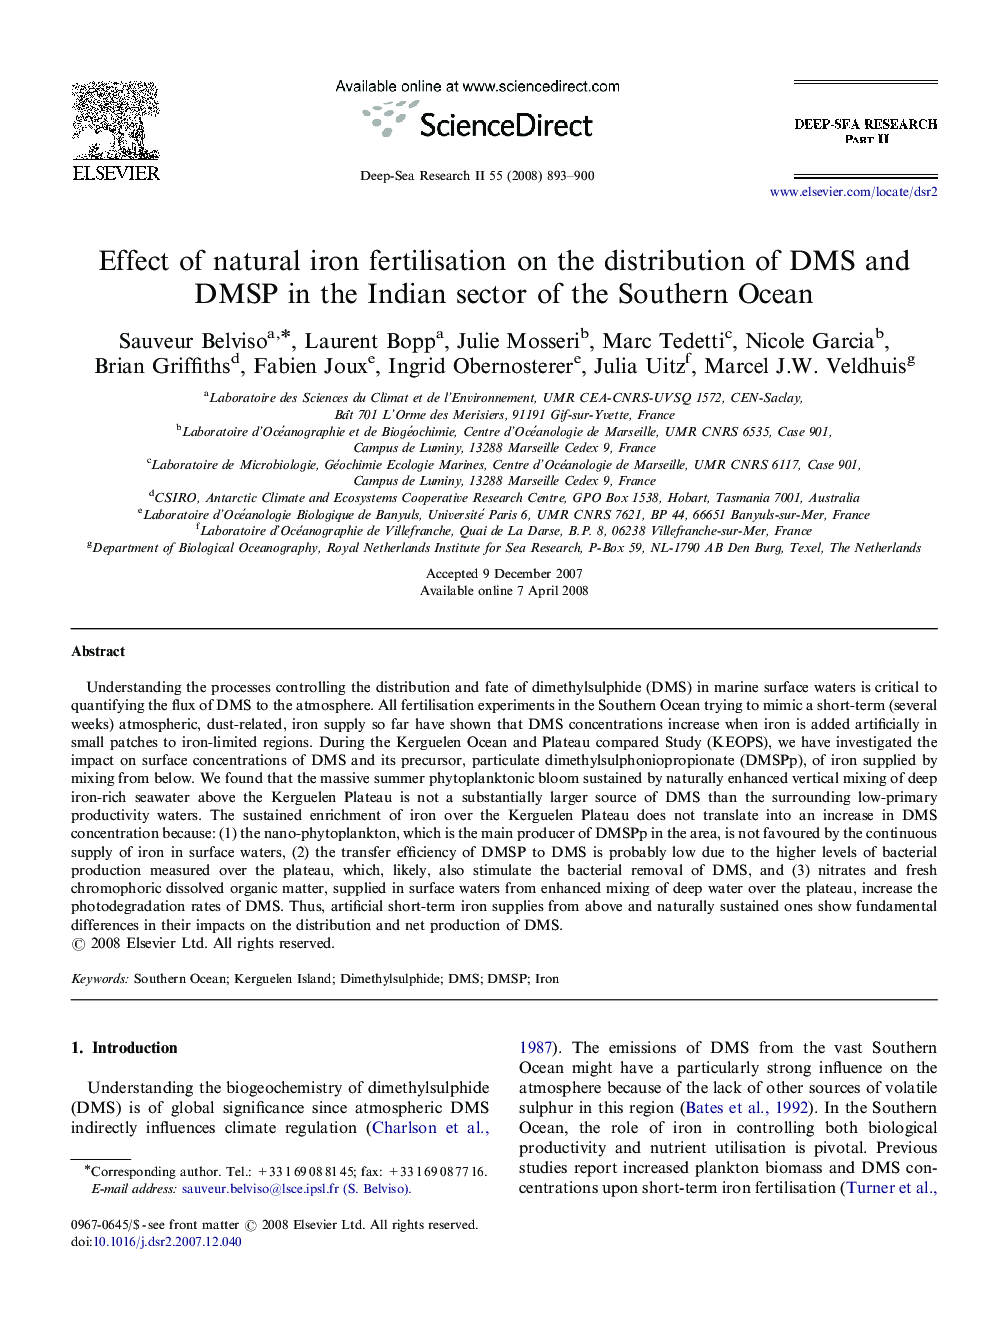 Effect of natural iron fertilisation on the distribution of DMS and DMSP in the Indian sector of the Southern Ocean